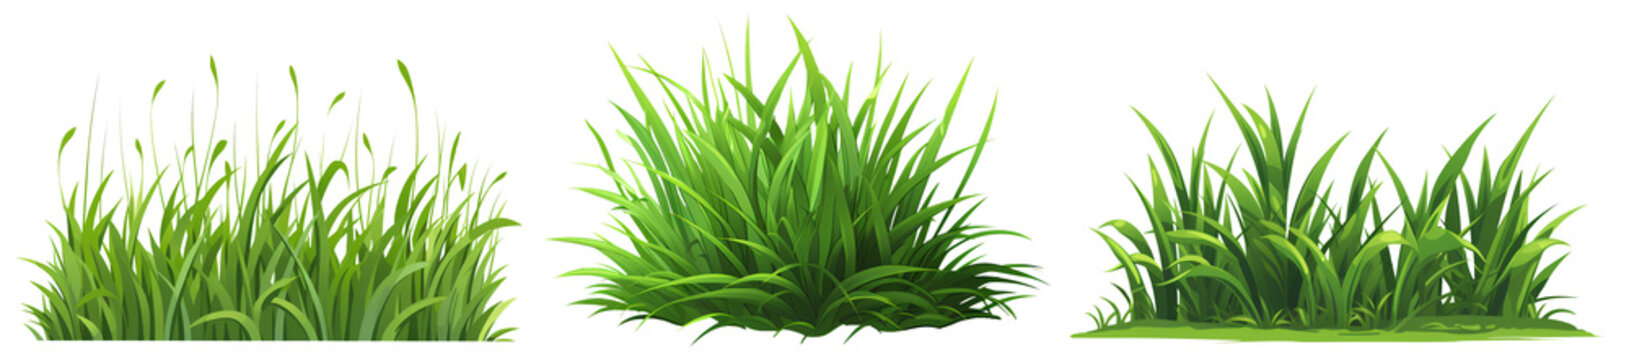 Set of clump of grass isolated on white and transparent background